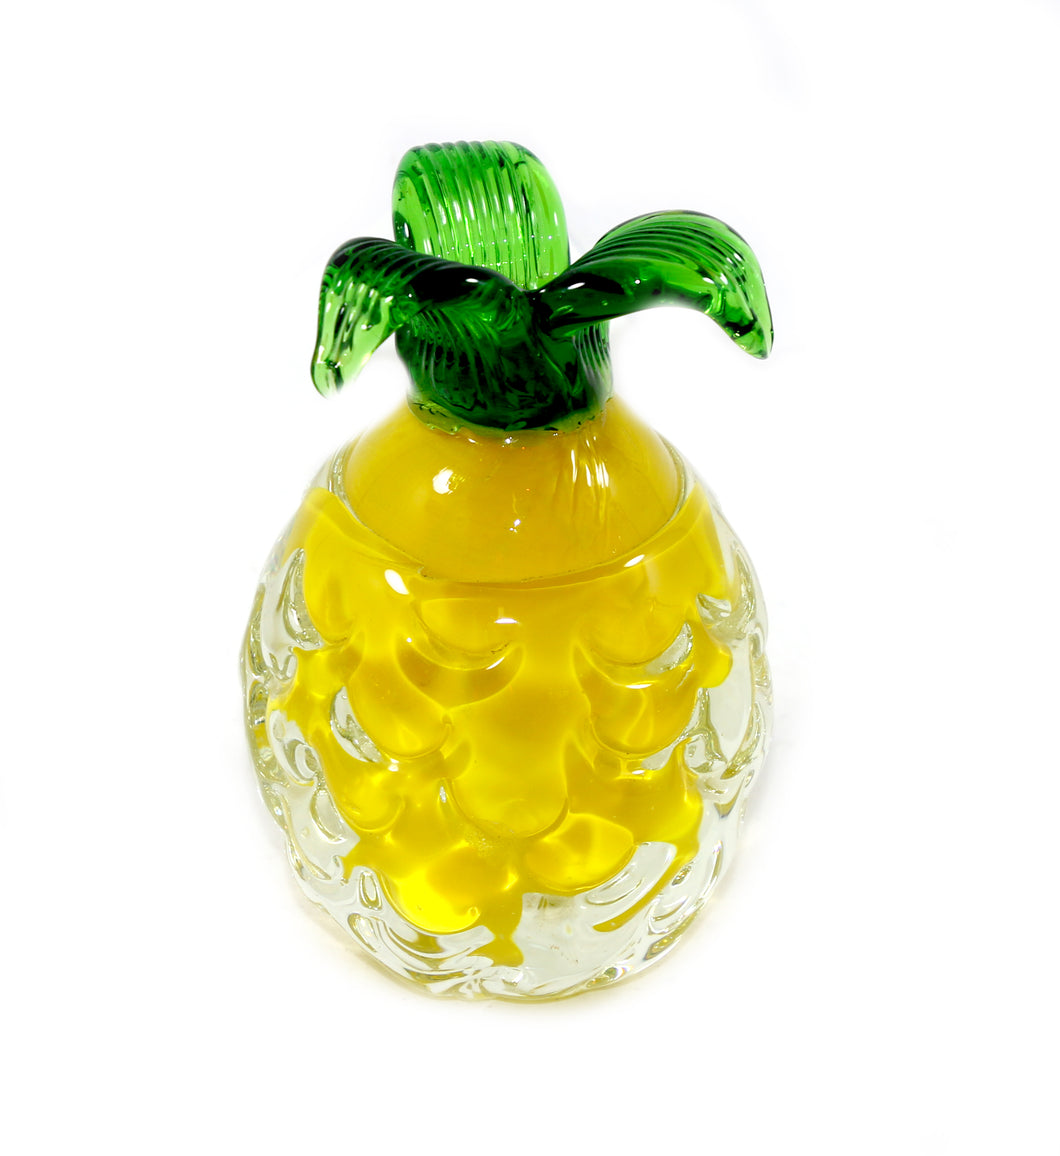 Vintage funky yellow & green solid heavy glass pineapple fruit paperweight